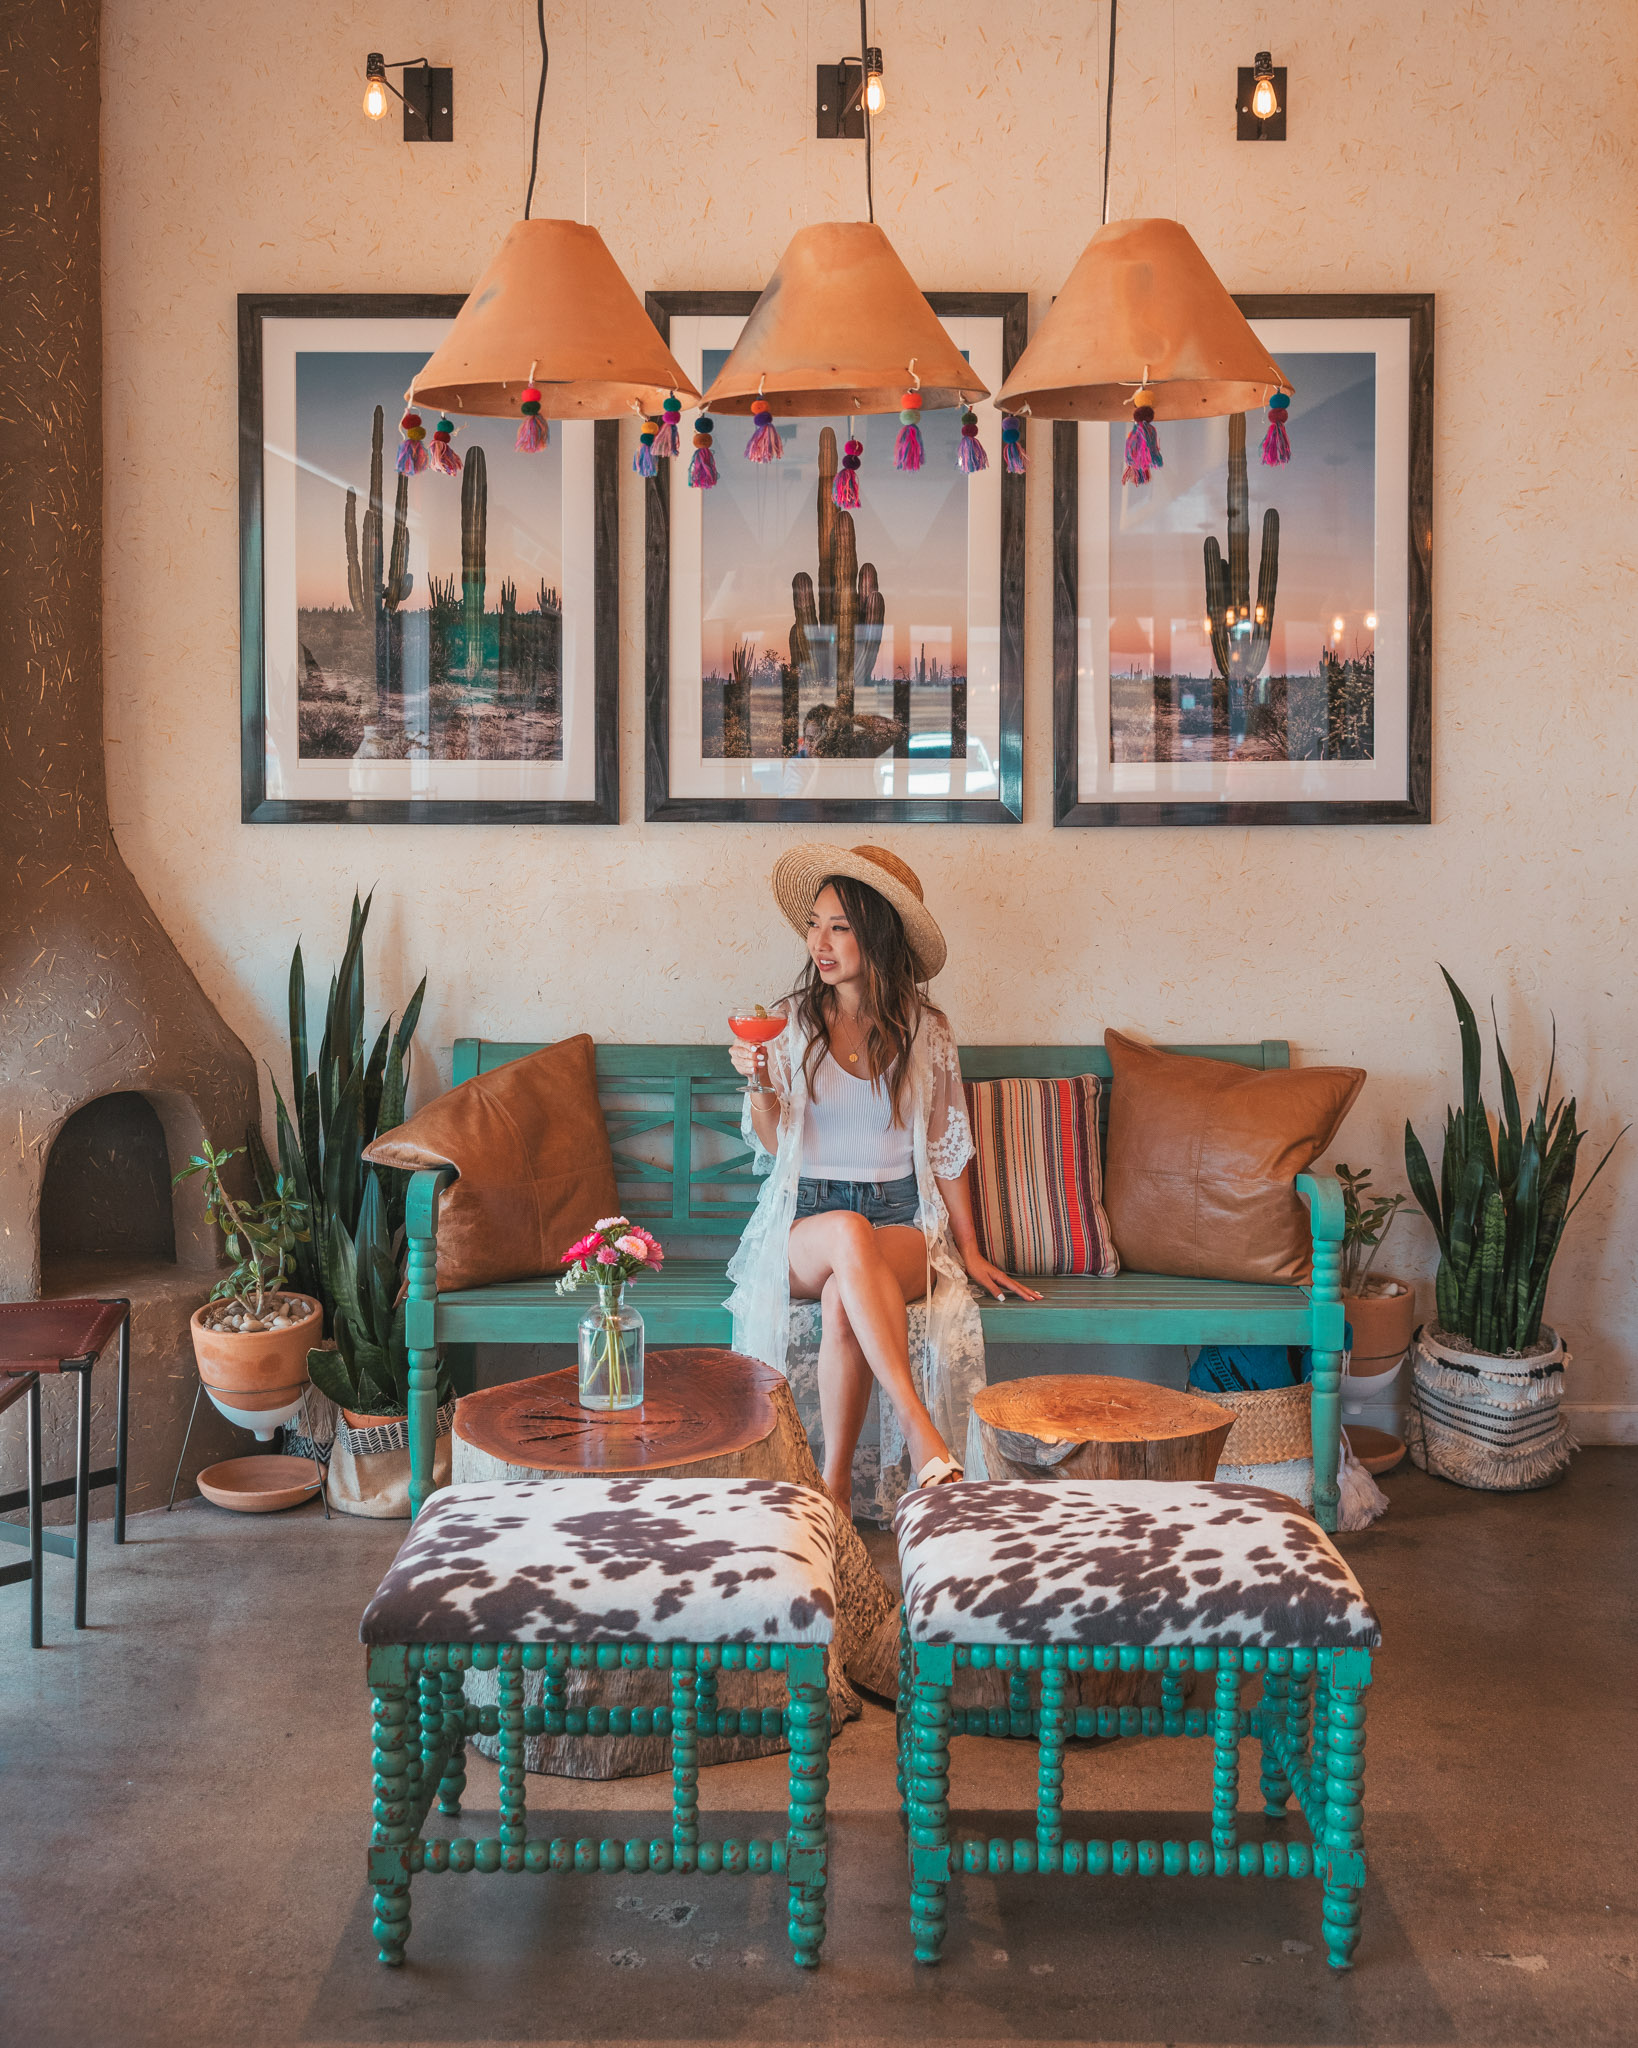 Cute decor at Ghost Ranch ~ The Quick Guide to Tempe, Arizona